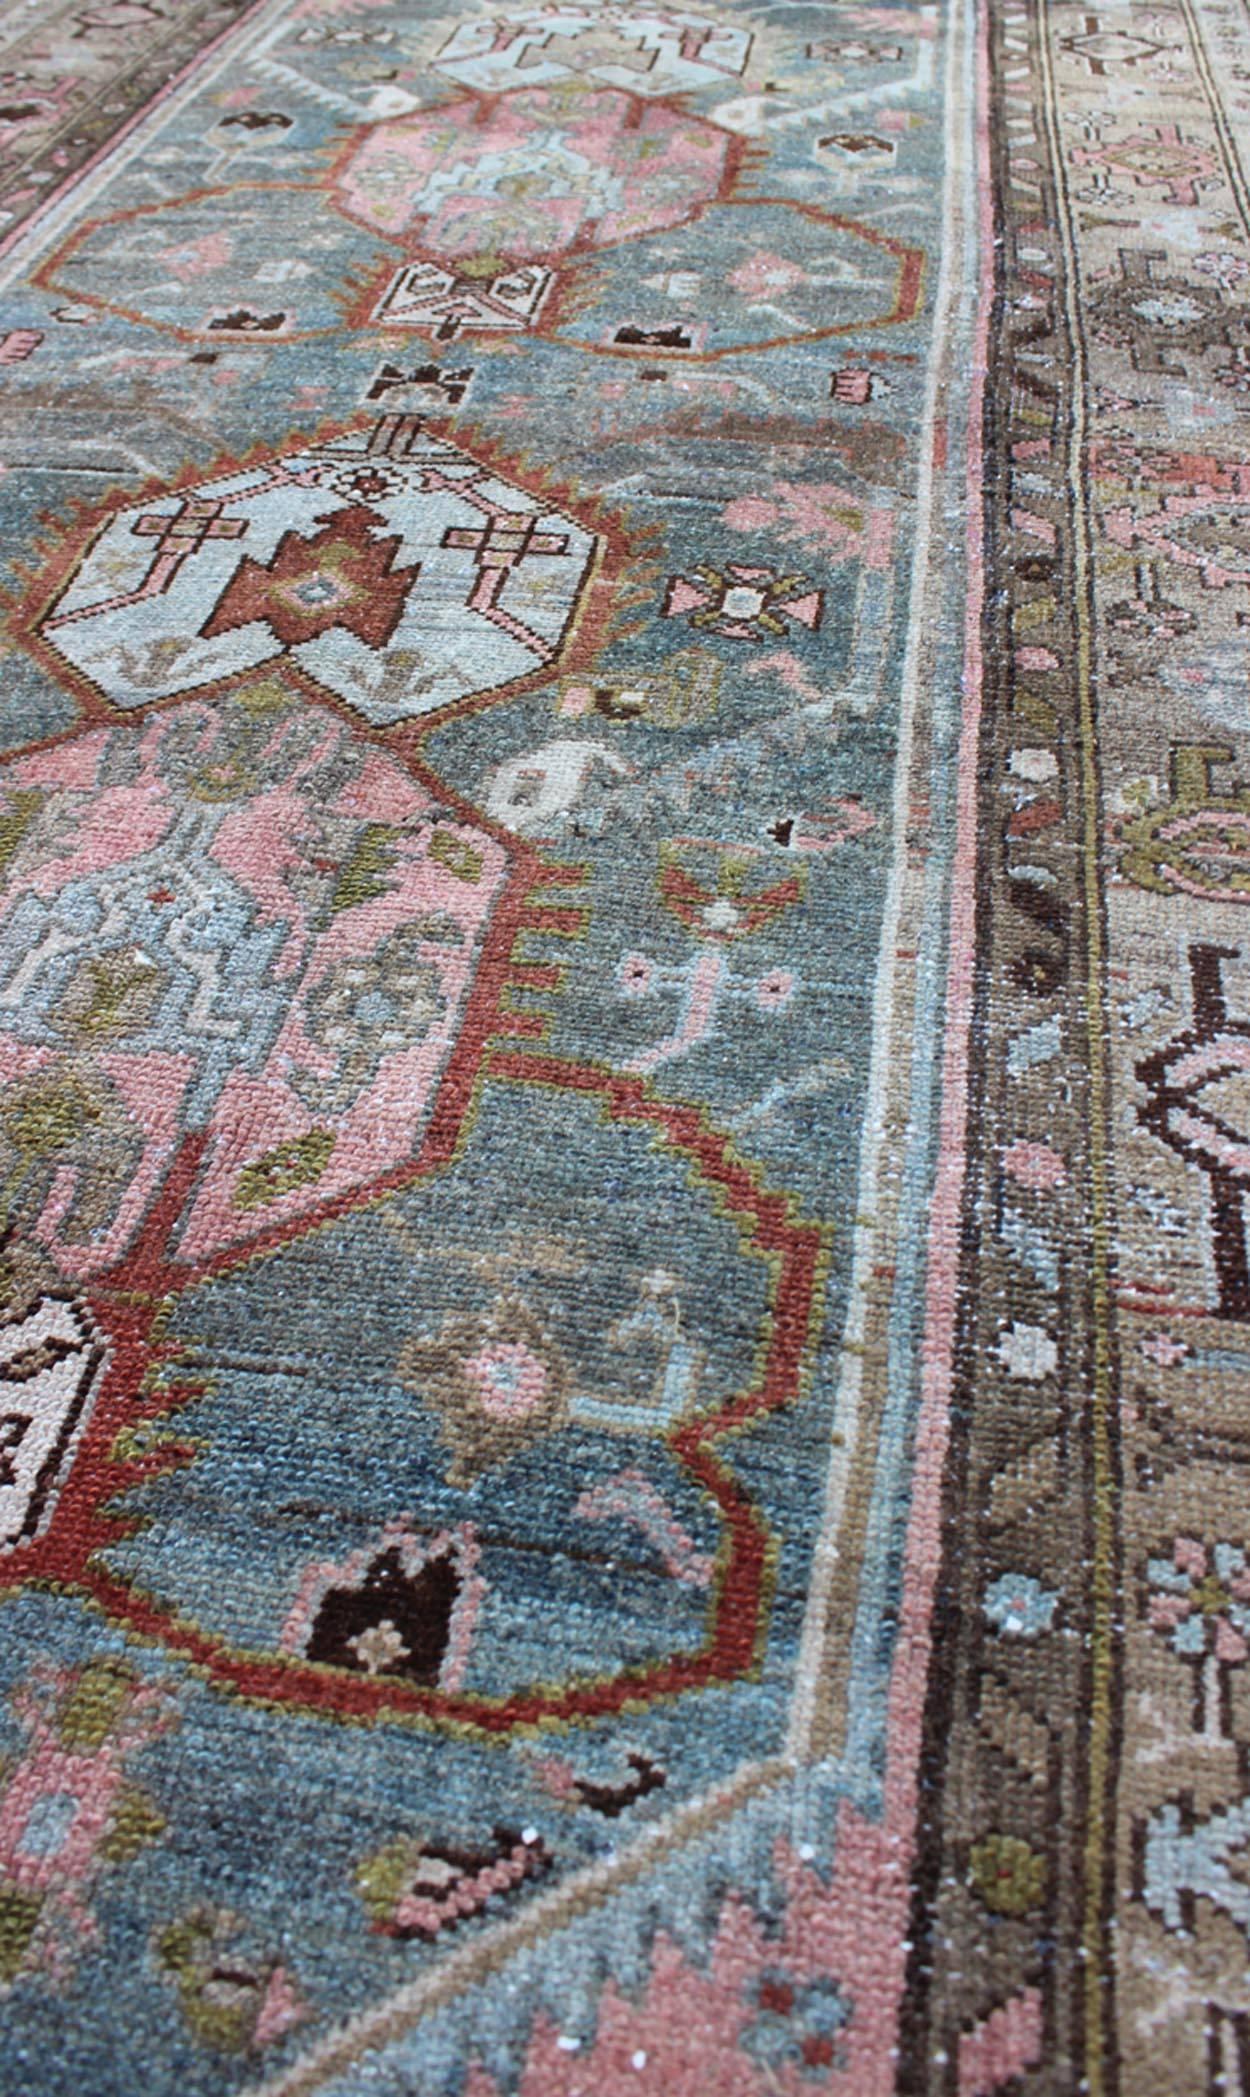 Early 20th Century Persian Malayer Runner with Beautiful Color Palette of Blue, Pink, Red and Taupe